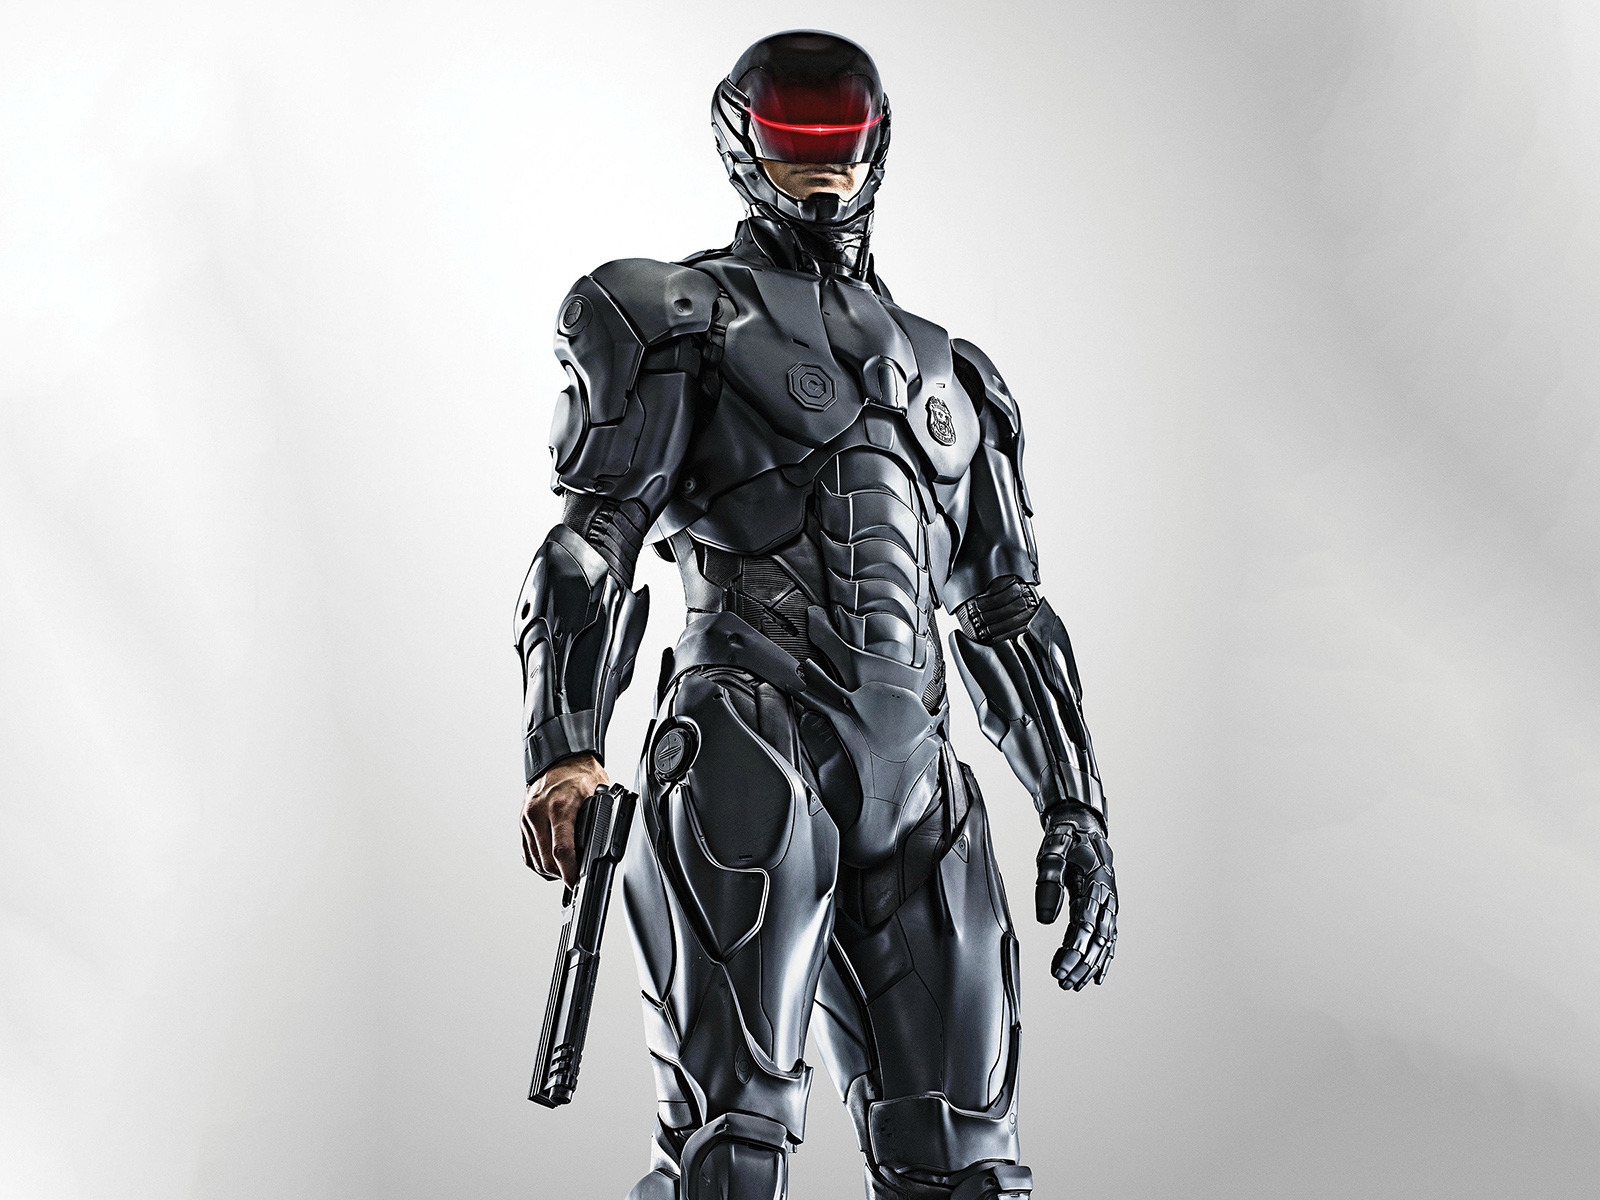 Robocop 2014 Poster for 1600 x 1200 resolution